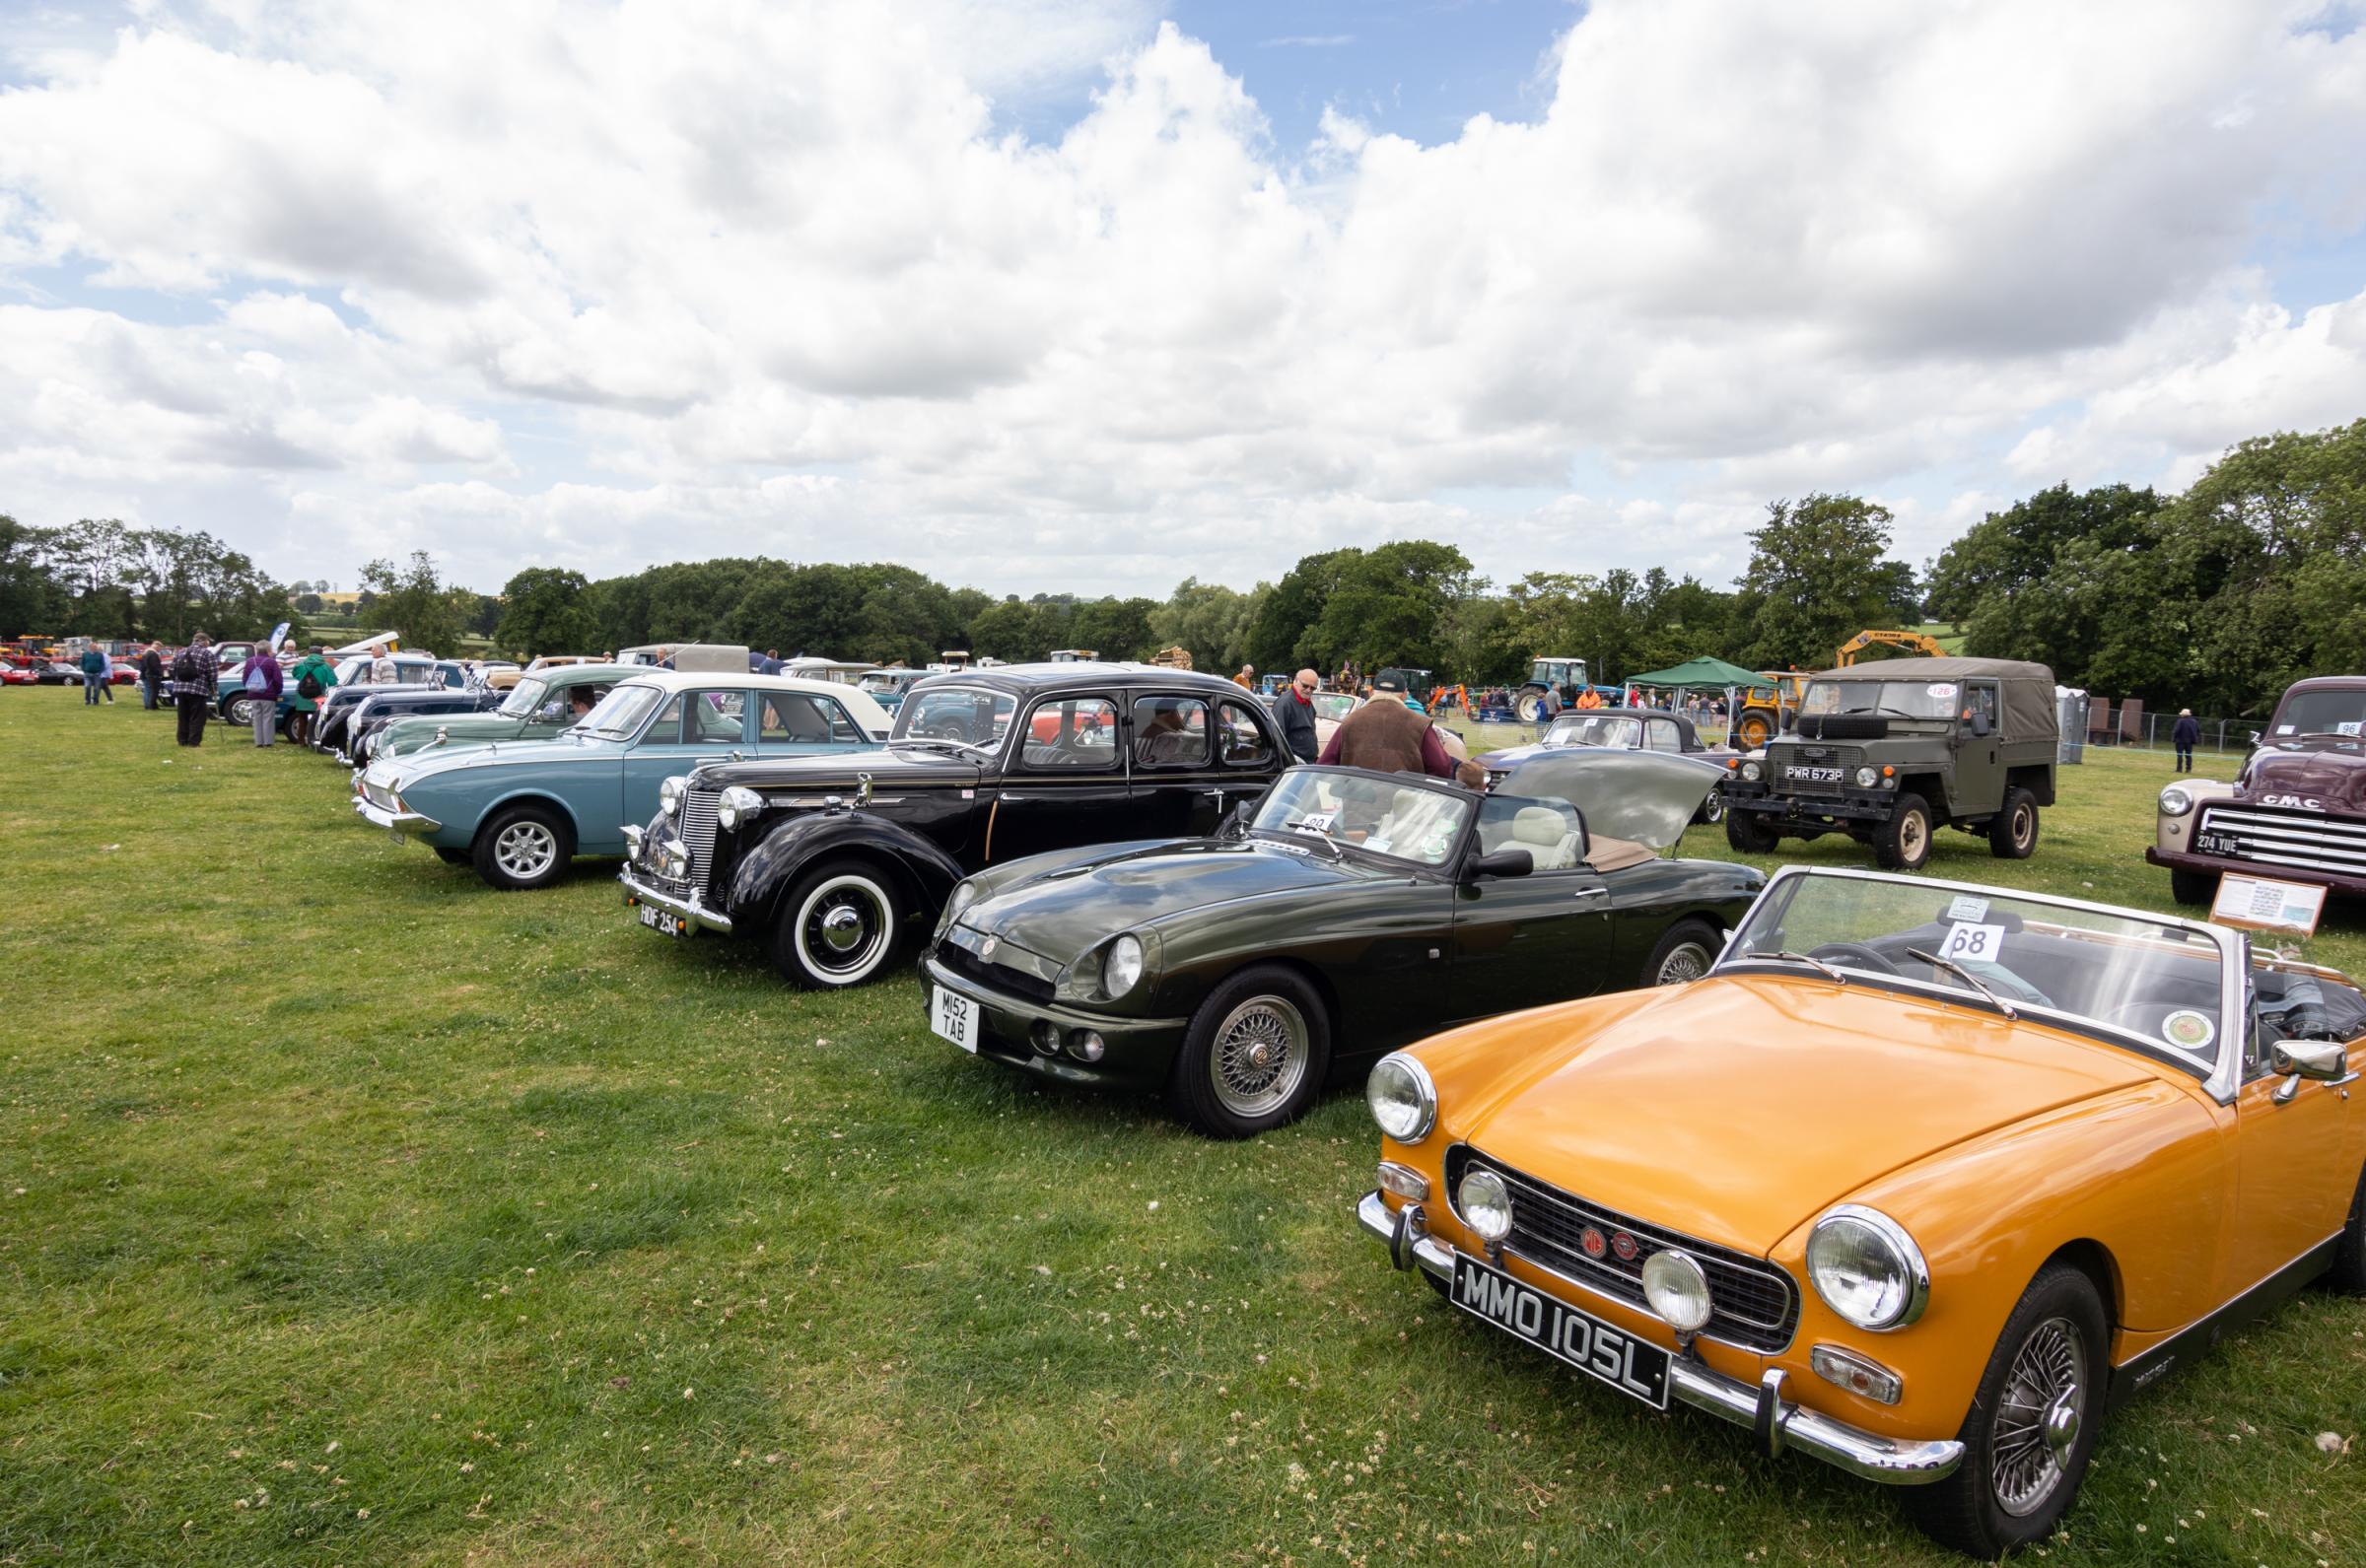 There were all kinds of classic and vintage cars at Bromyard Gala 2022. Picture: Sofie Smith